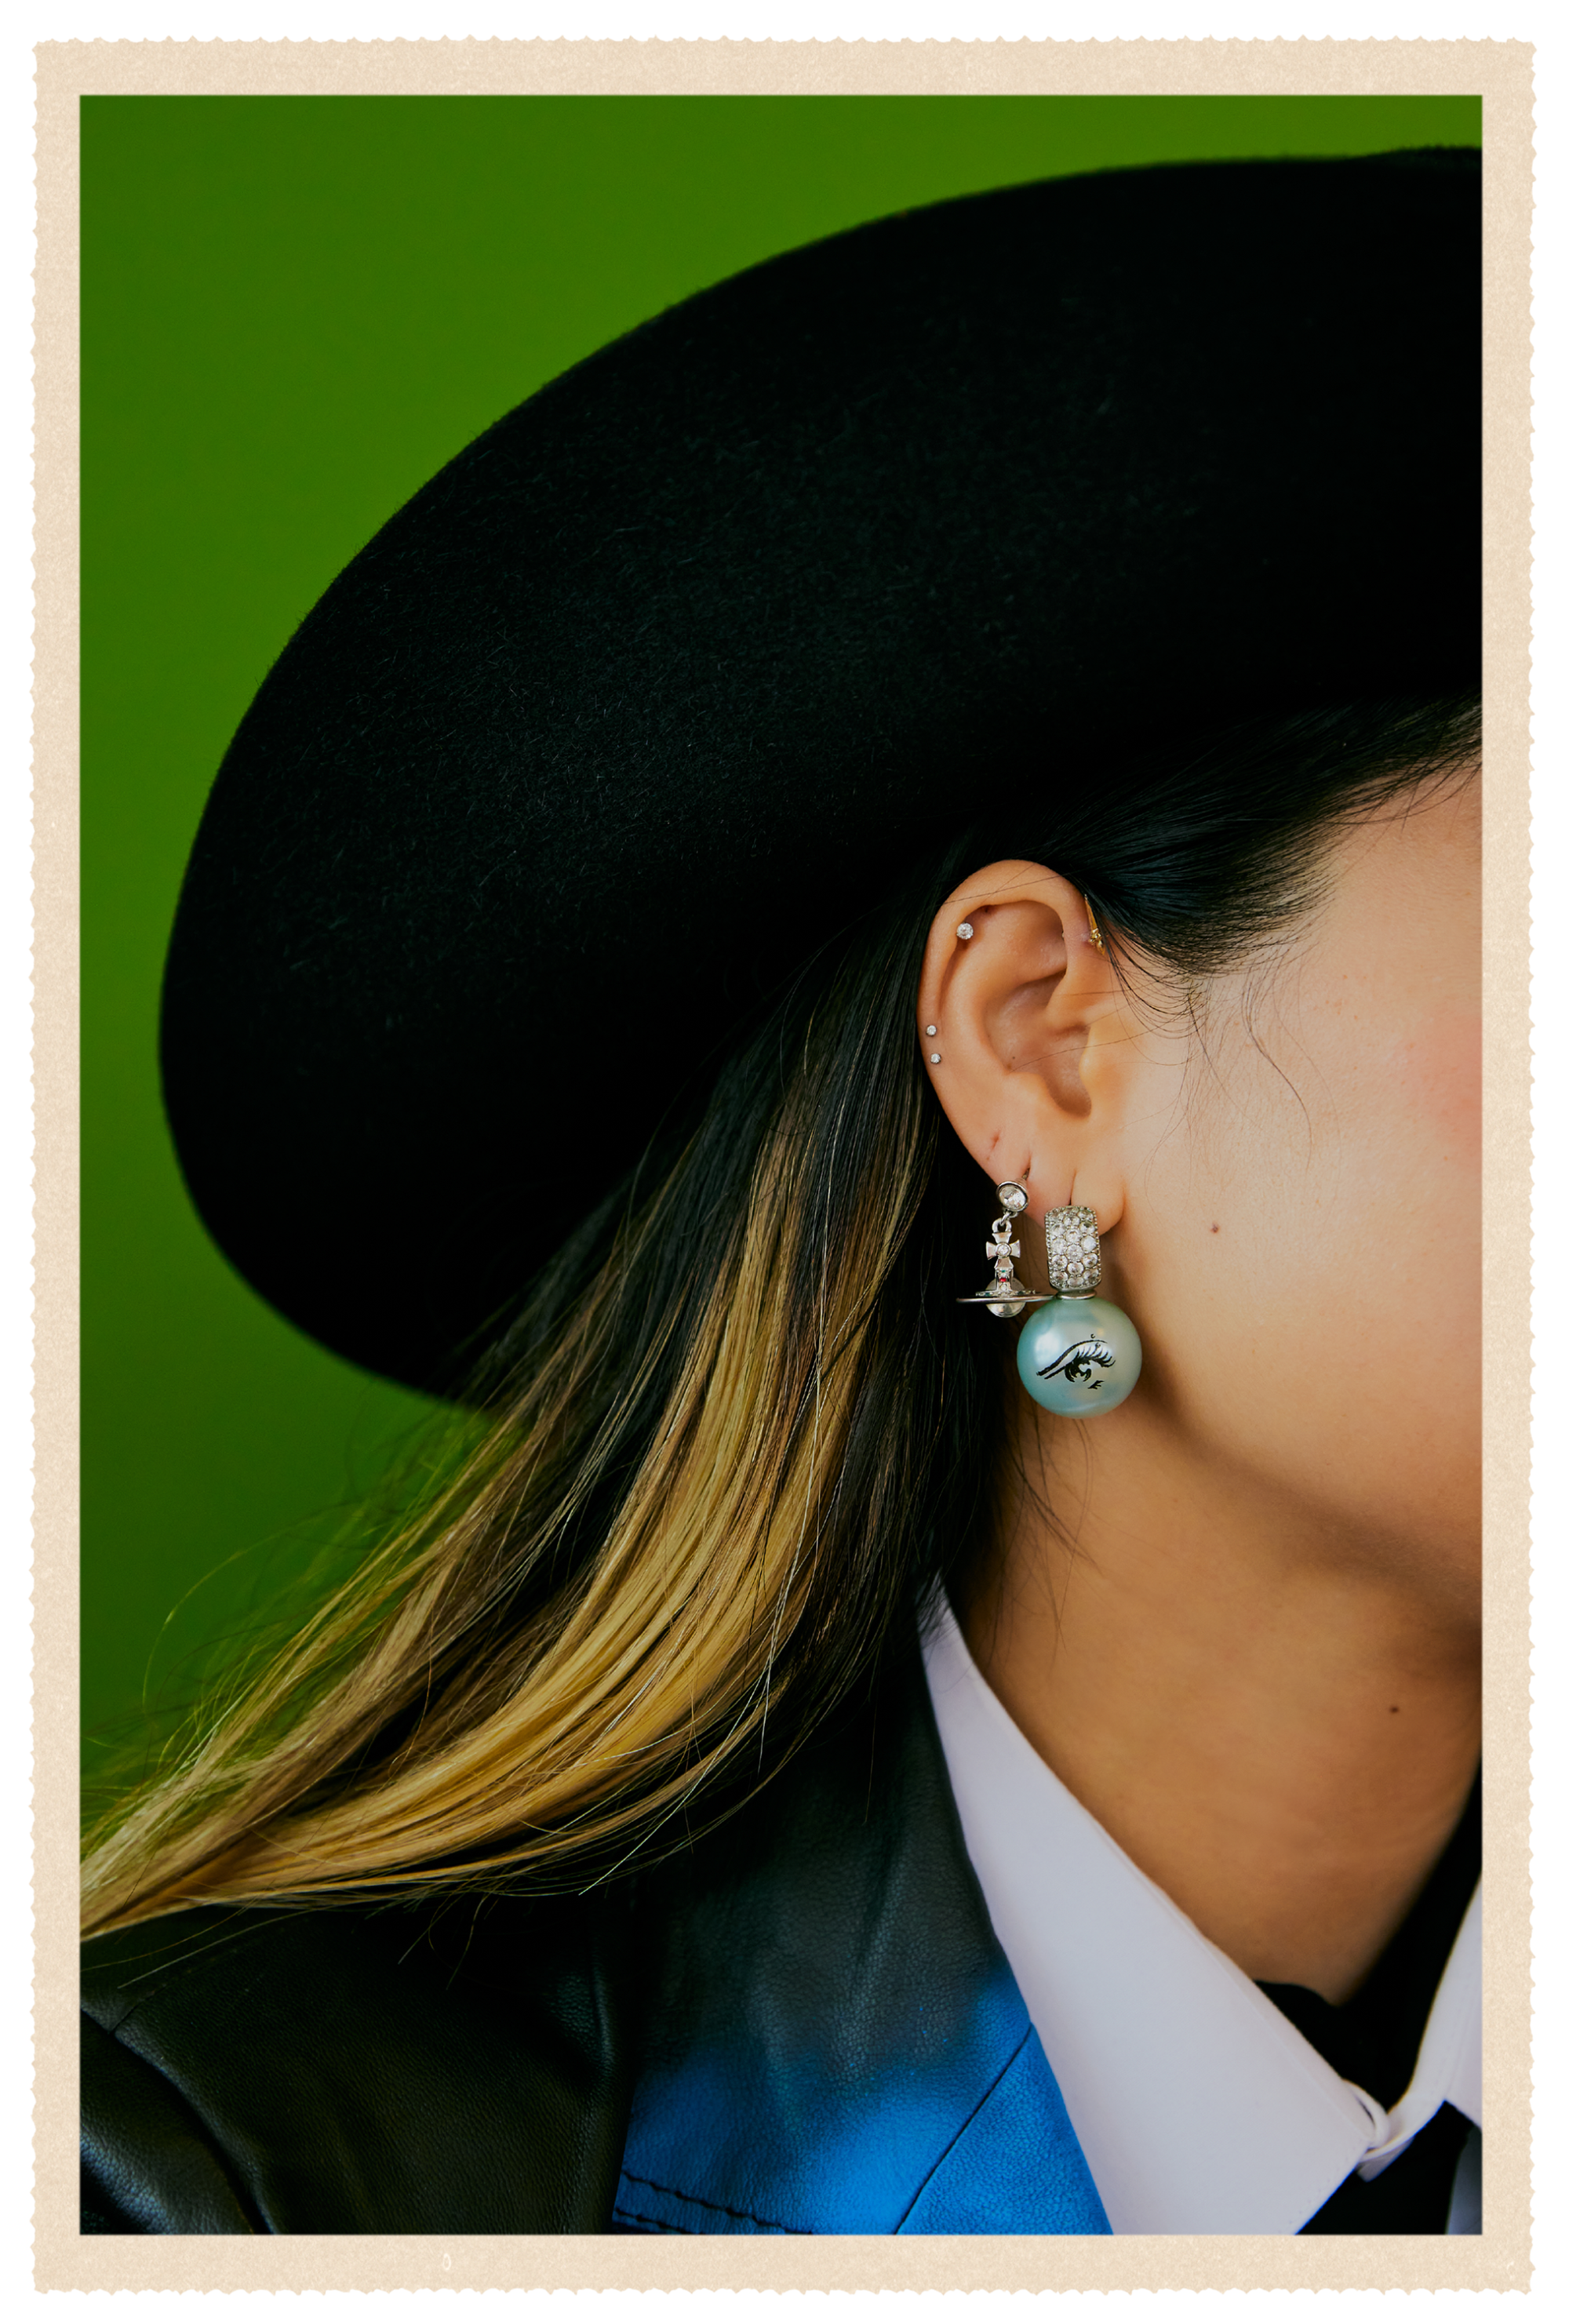 A detail shot of Ann-Marie Hoang's black hat and earrings.